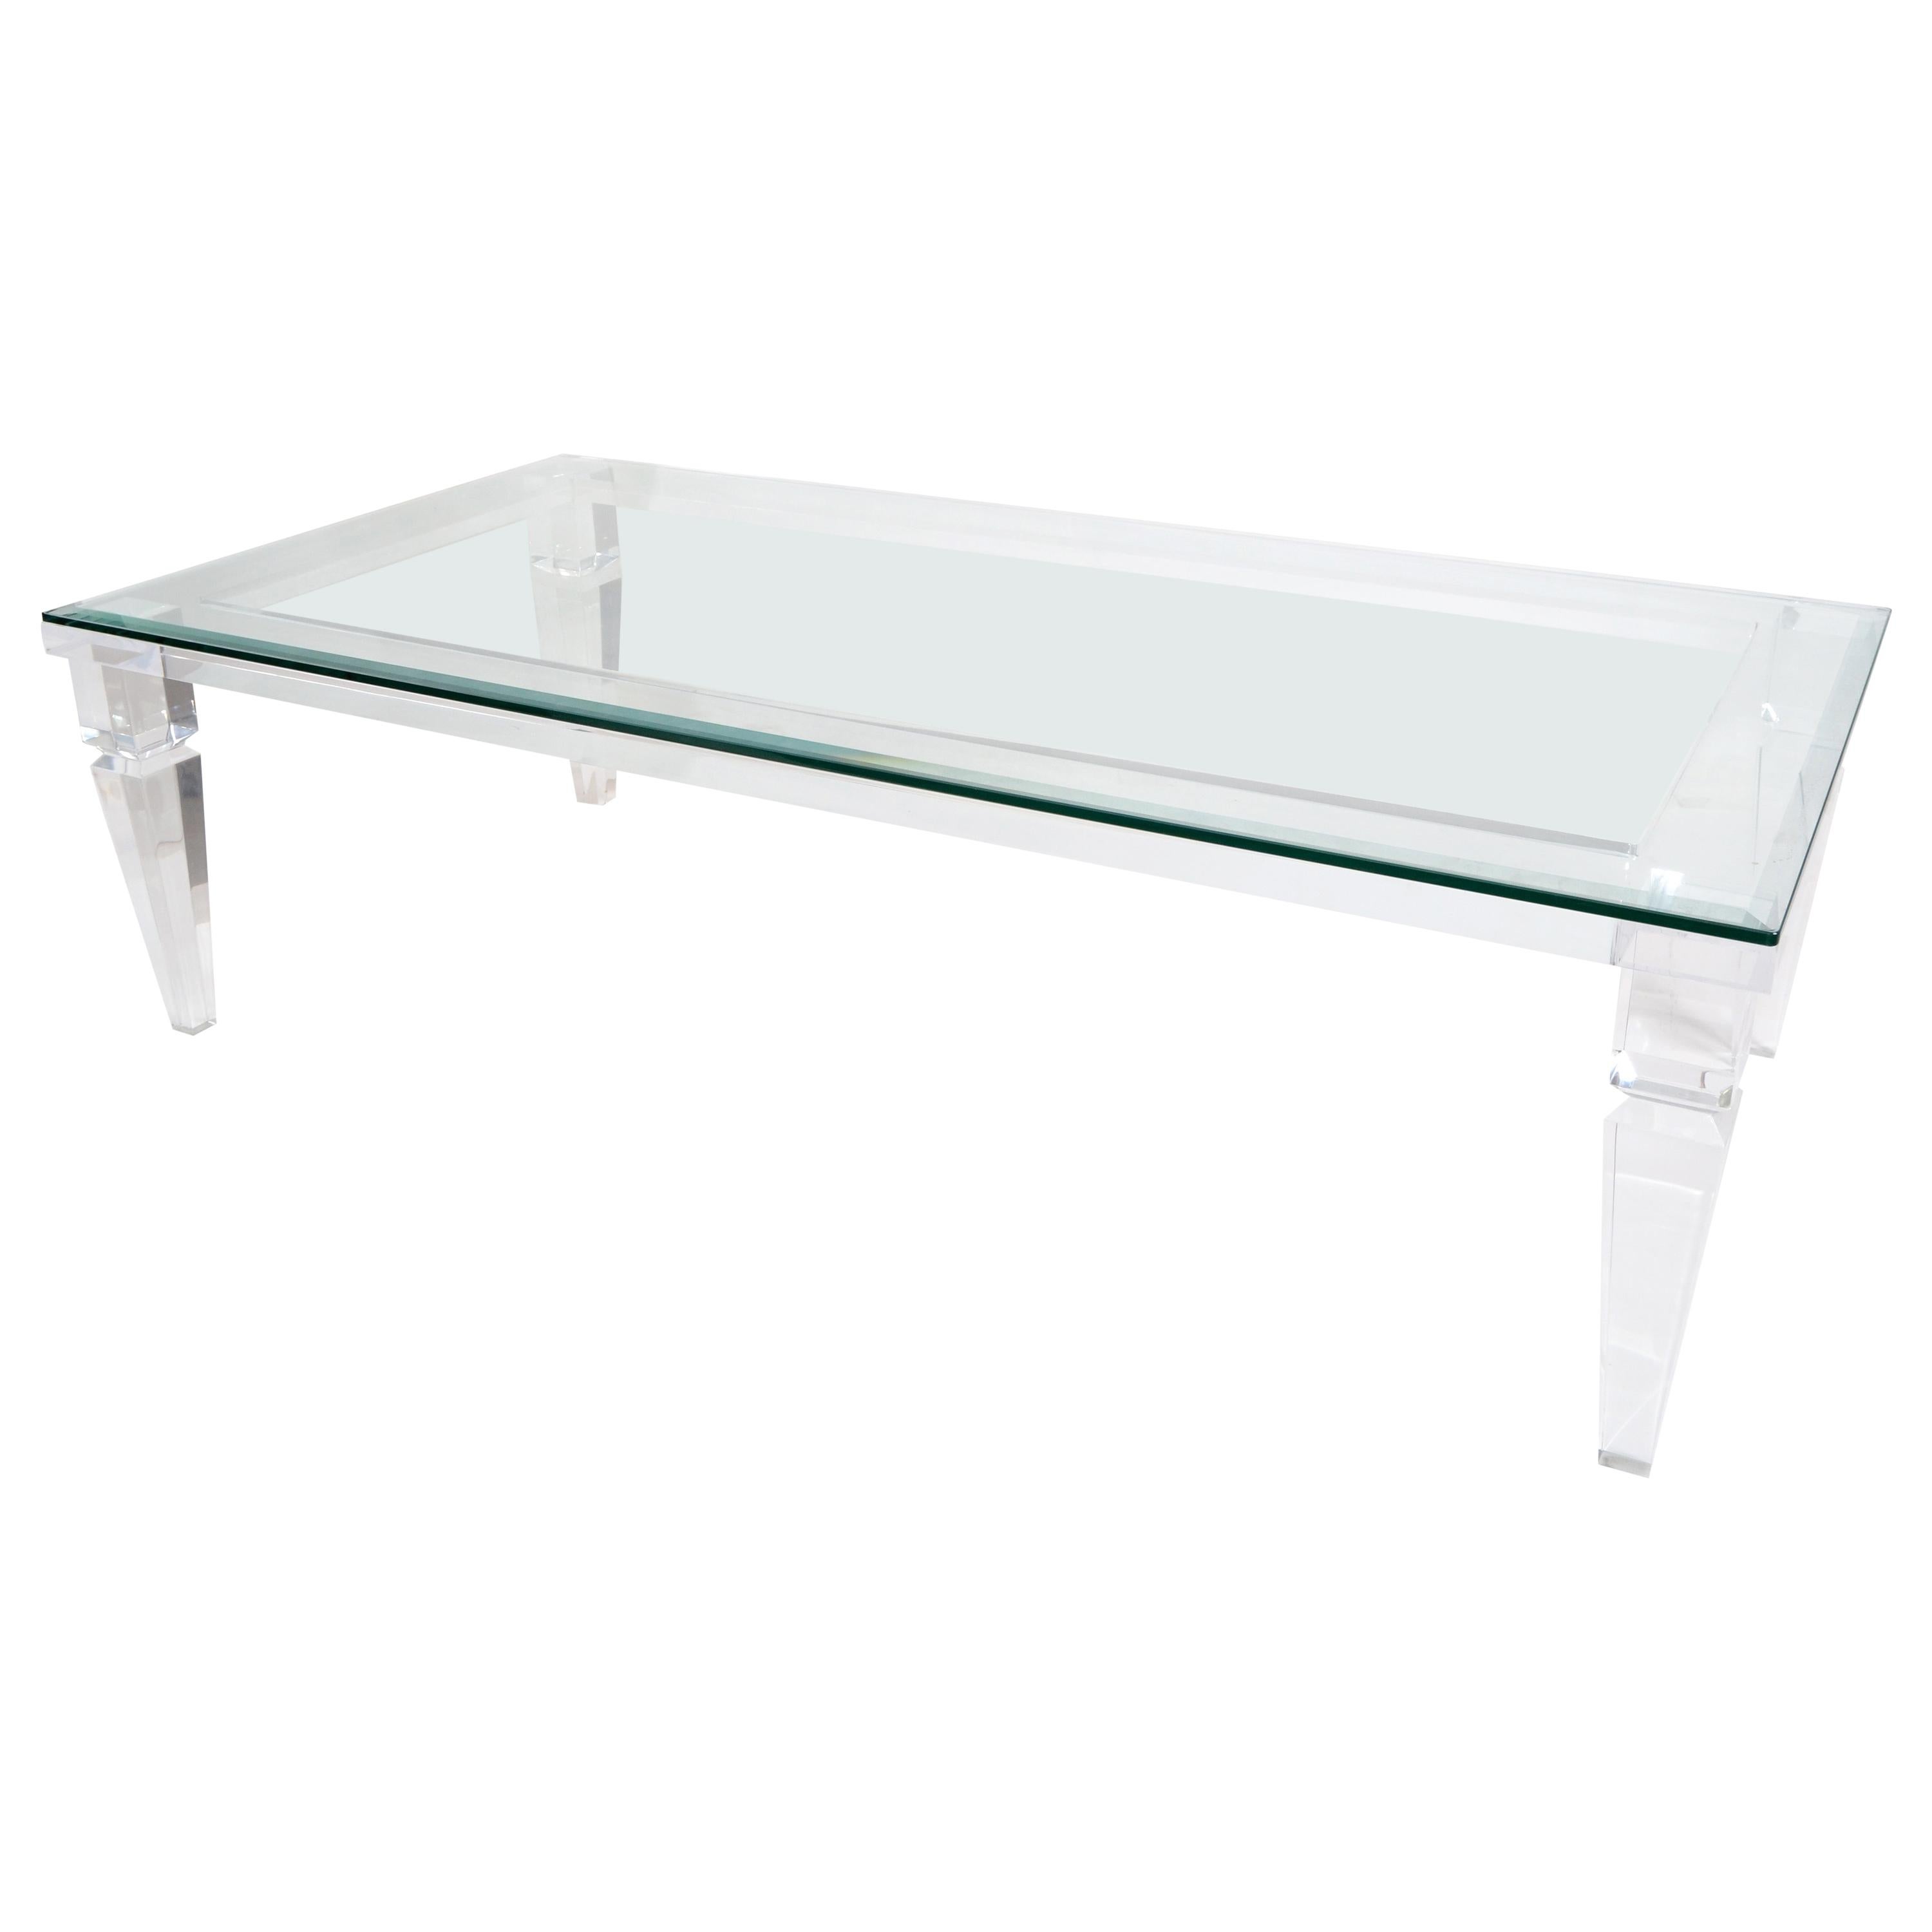 Charles Hollis Jones Mid-Century Modern Lucite & Beveled Glass Coffee Table 1970 For Sale